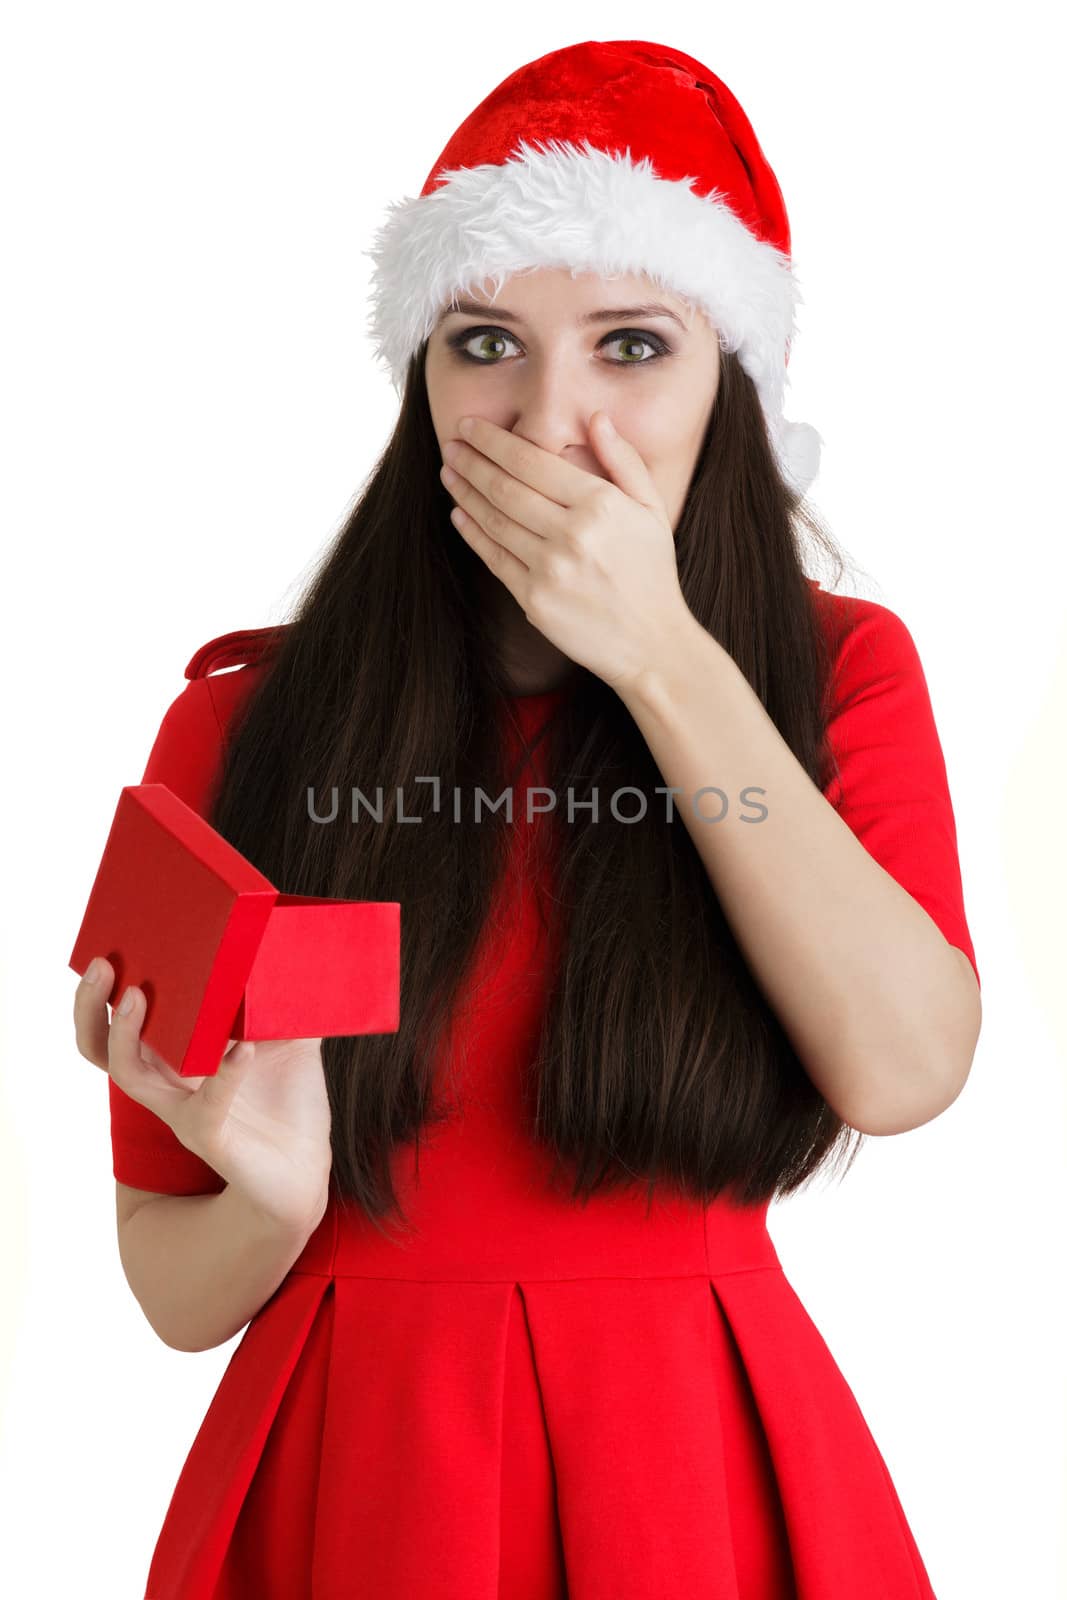 Christmas Girl Holding Present Box by NicoletaIonescu